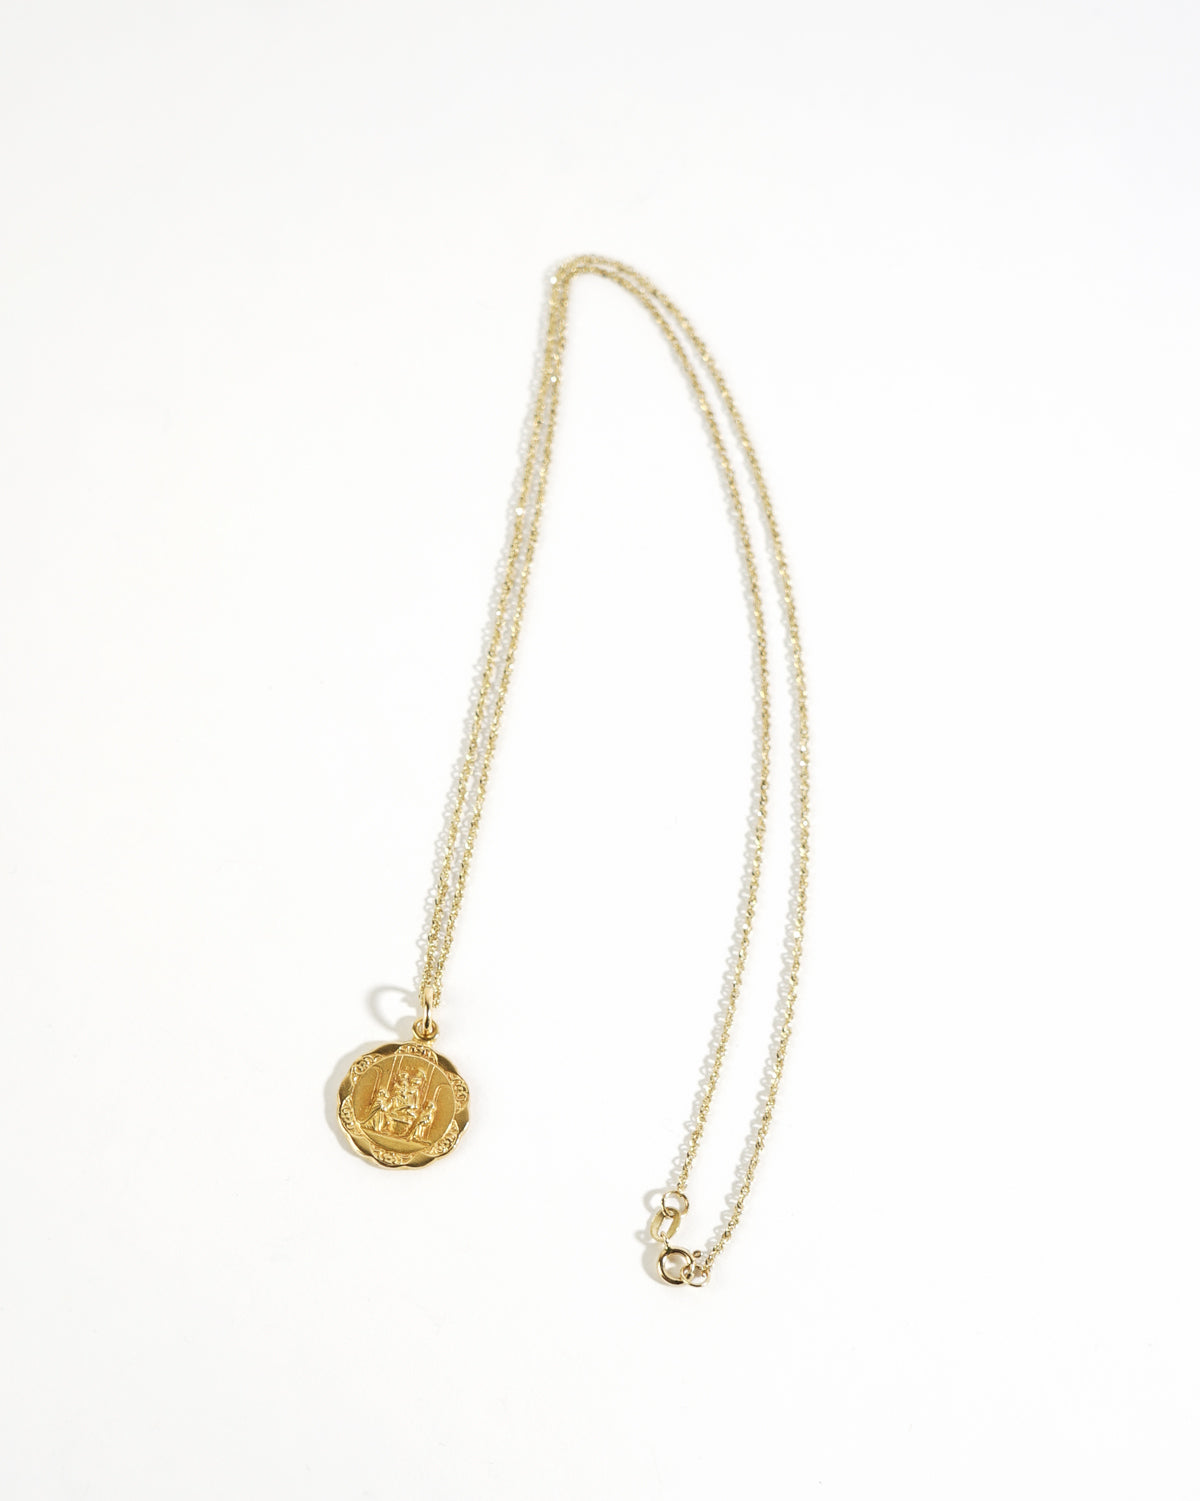 14k Gold Religious Coin Charm Necklace